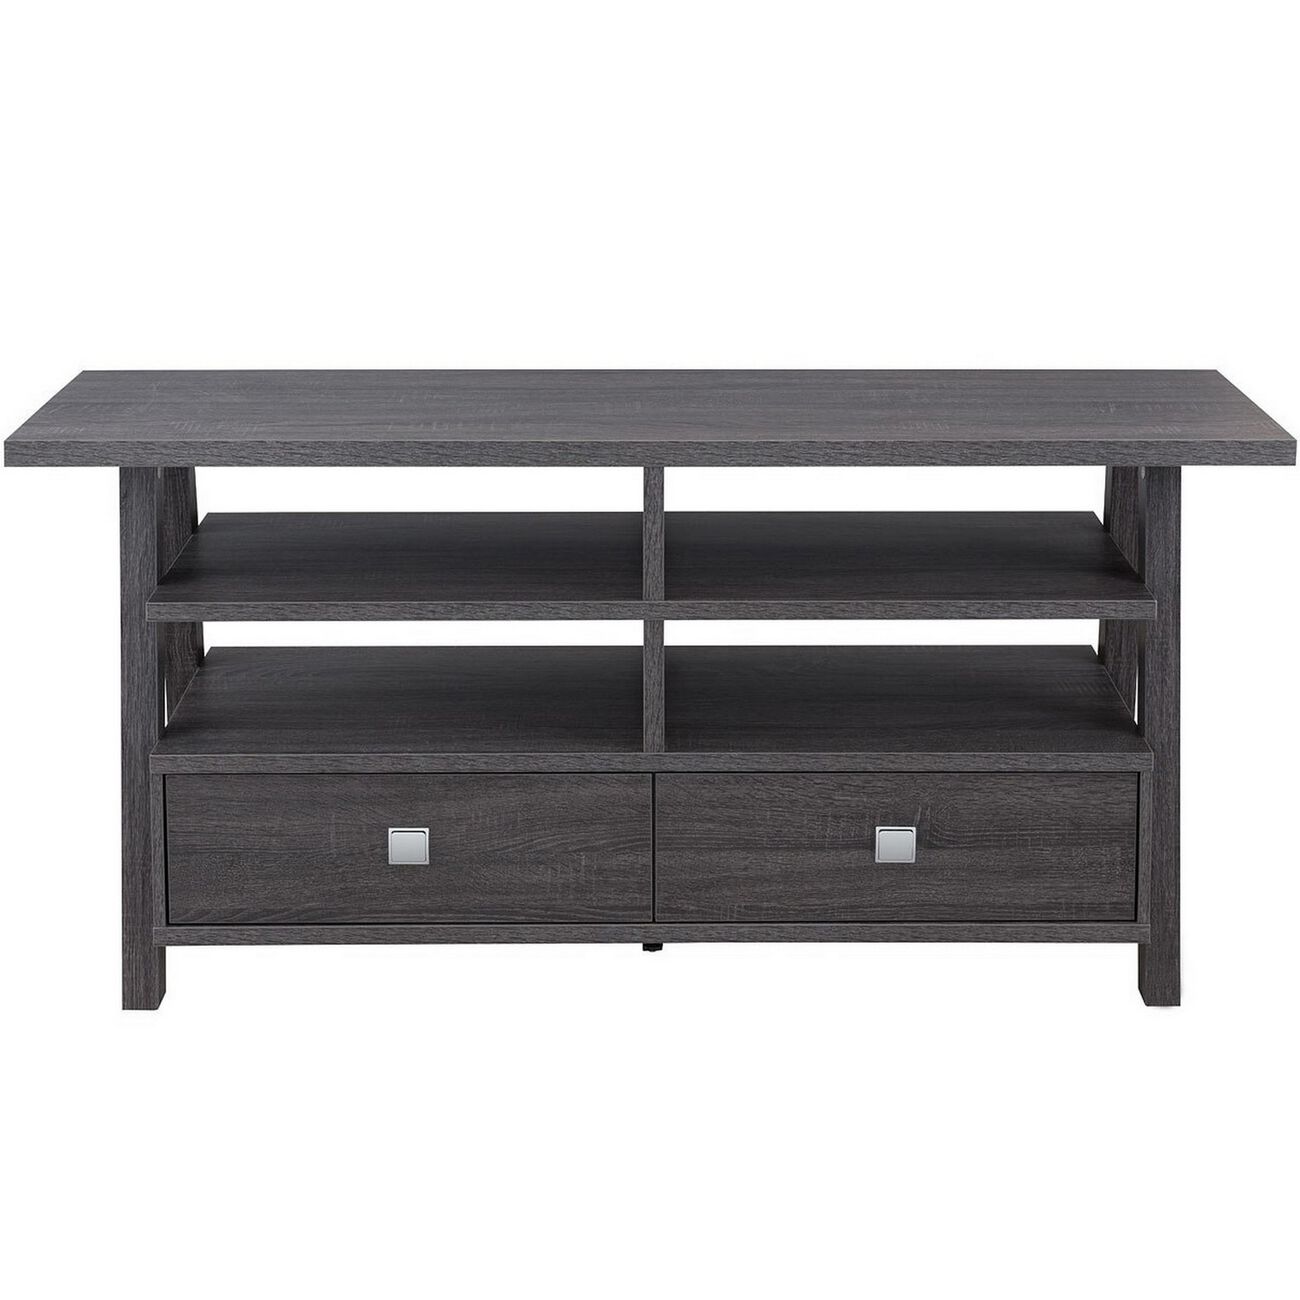 Transitional Wooden TV Stand with 4 Open Shelves and 2 Drawers, Gray